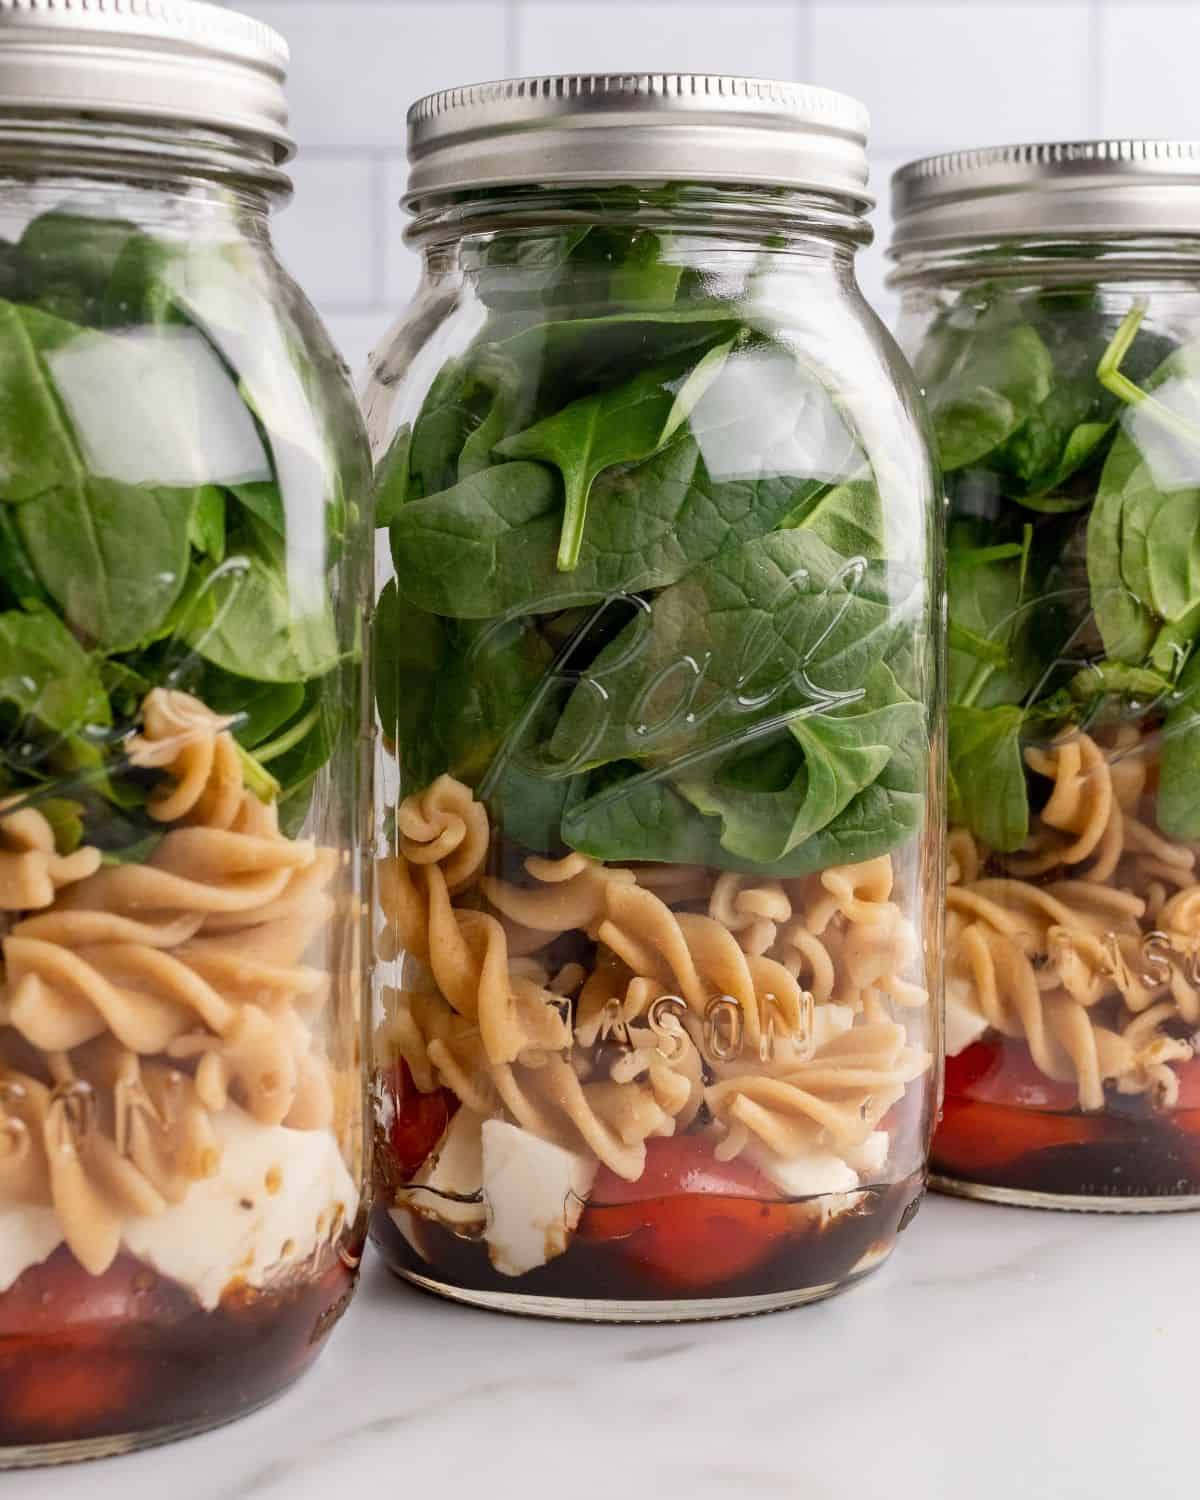 spinach salad with pasta layered in a jar.